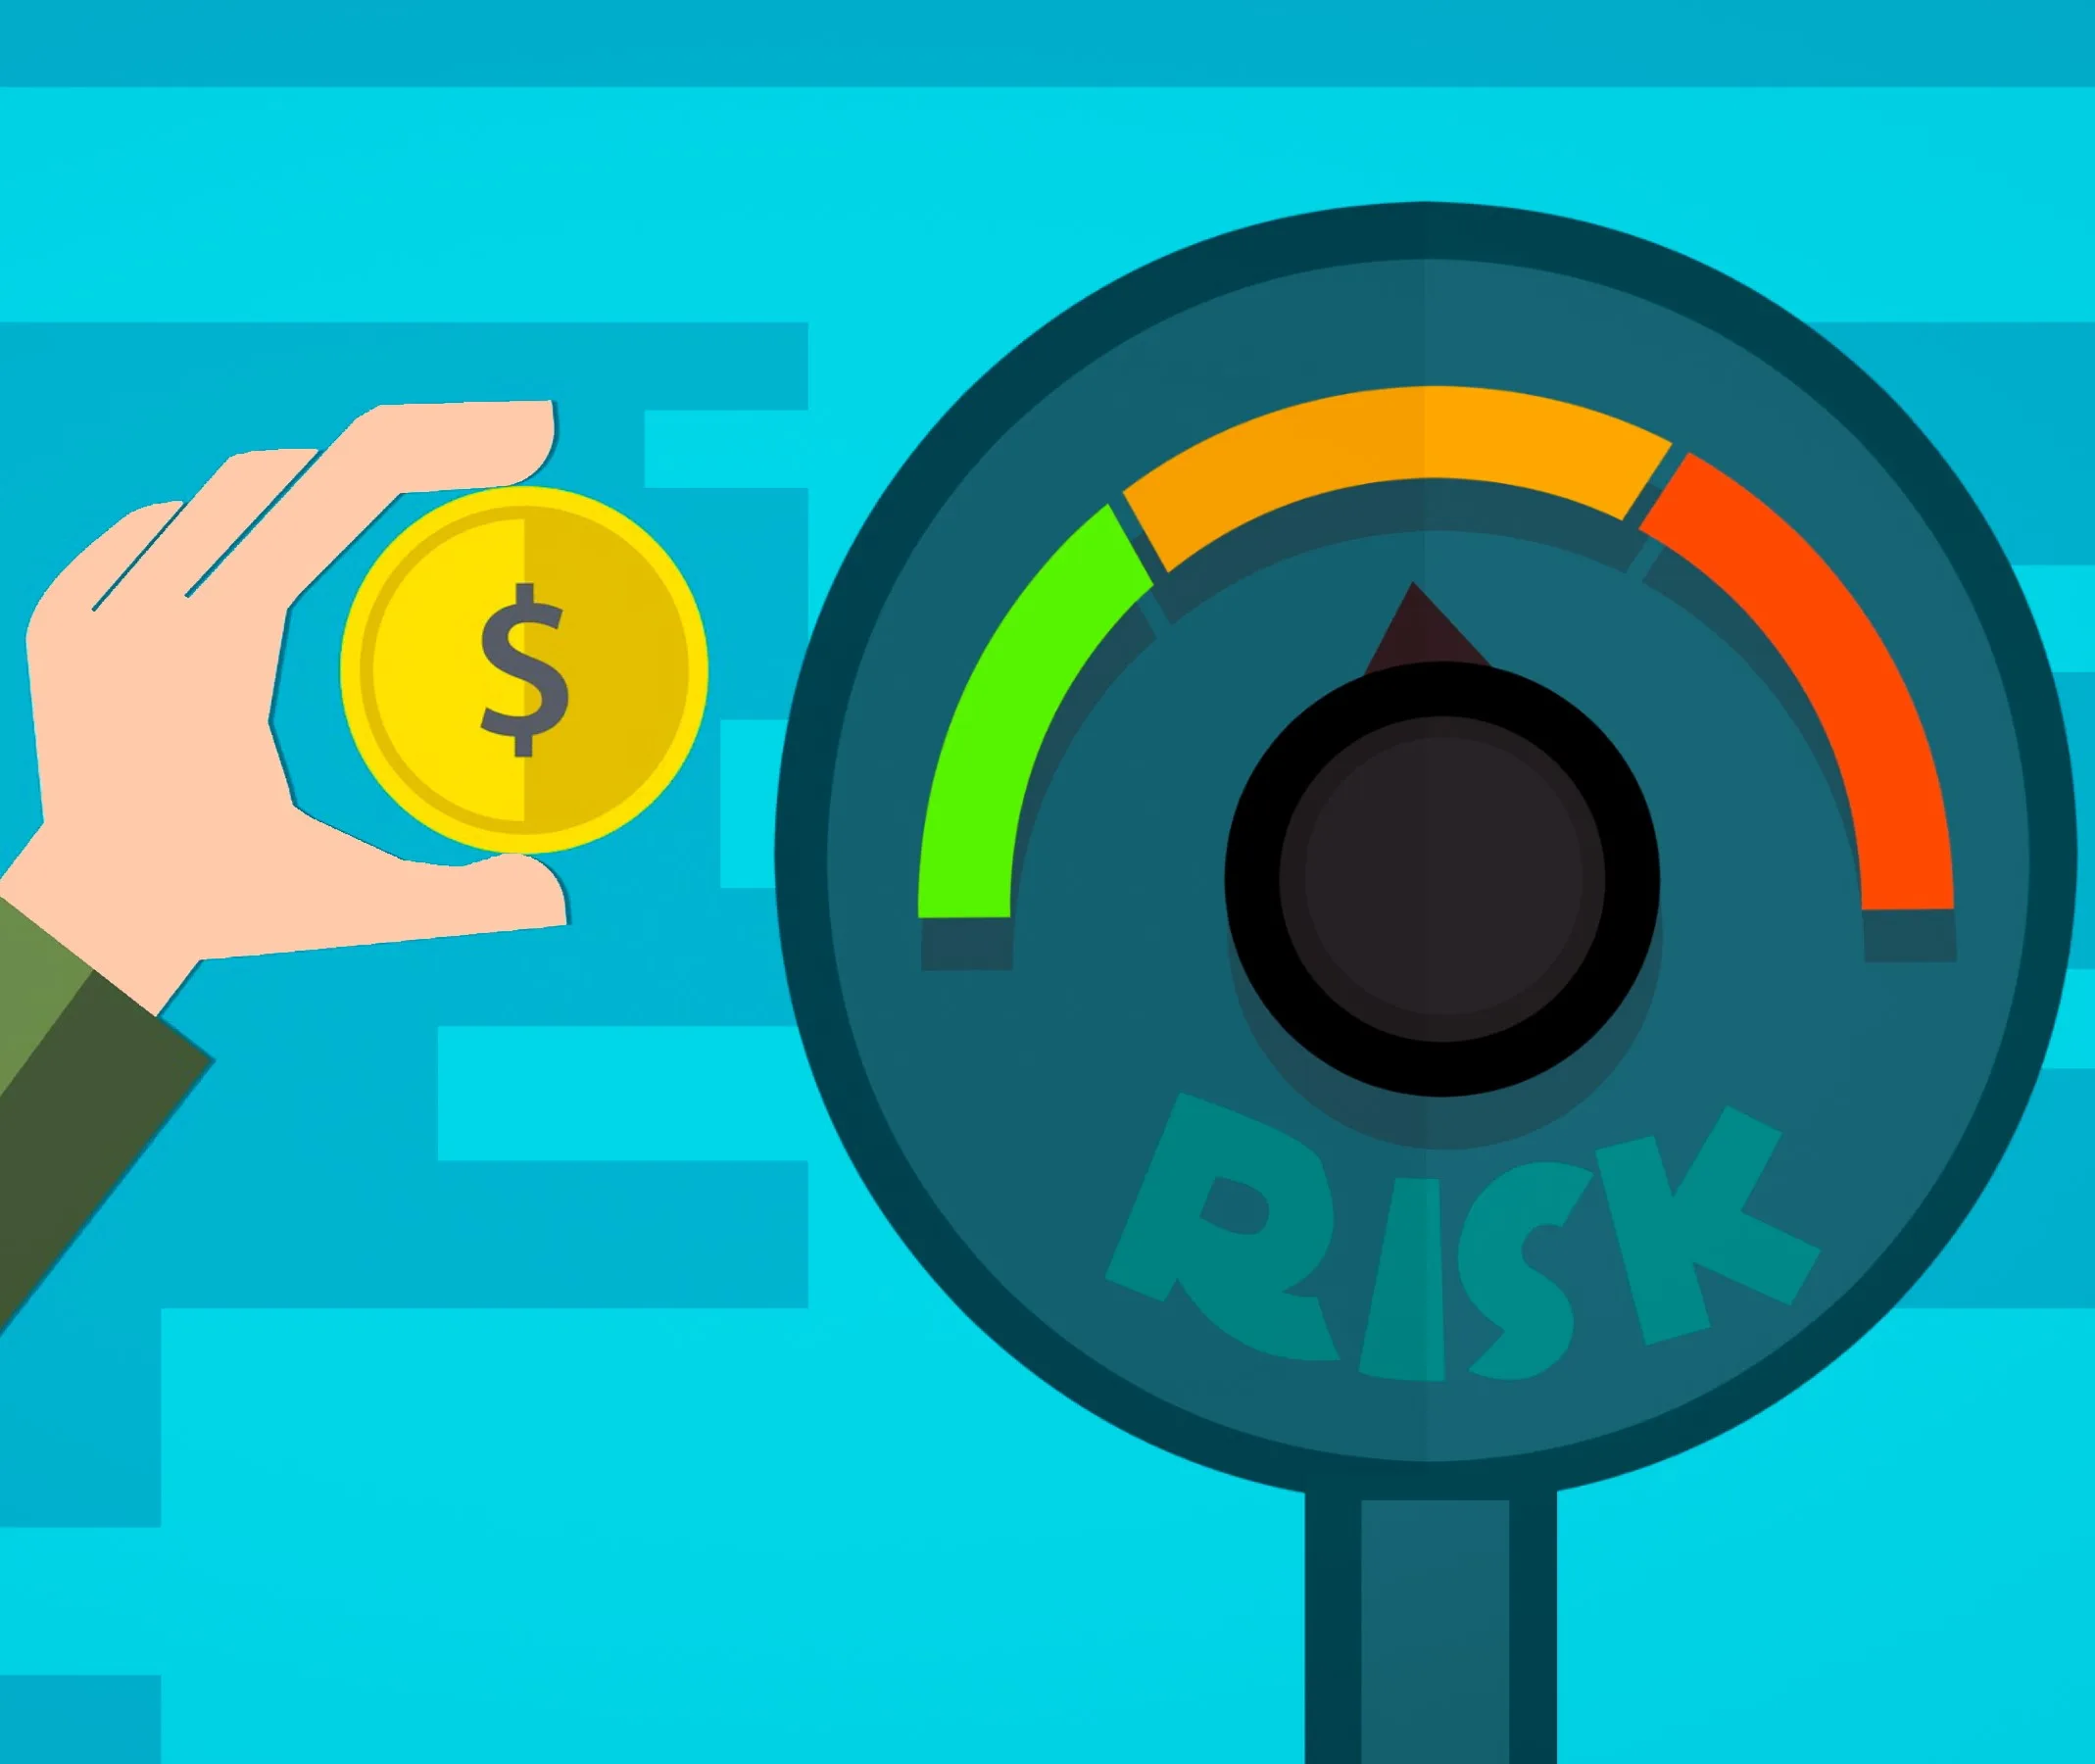 Illustrated image for Risk evaluation with a parking meter style labeled "RISK" with a spectrum from green to yellow to red. A hand holding a coin suggesting money or assets is posed to put the coin in the meter.